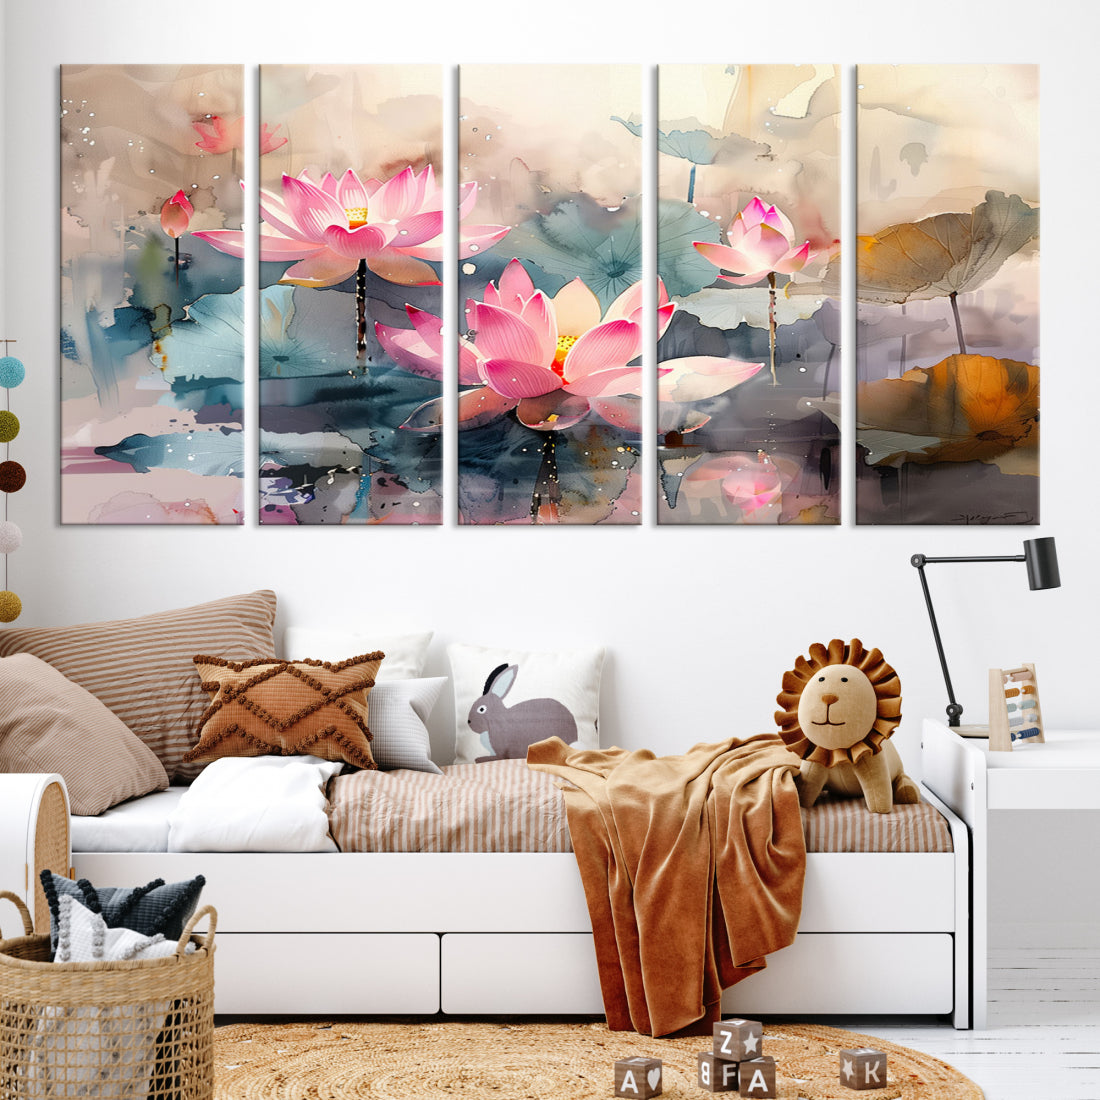 Flower abstract canvas Floral wall art print, Colorful modern artwork, Above bed decor